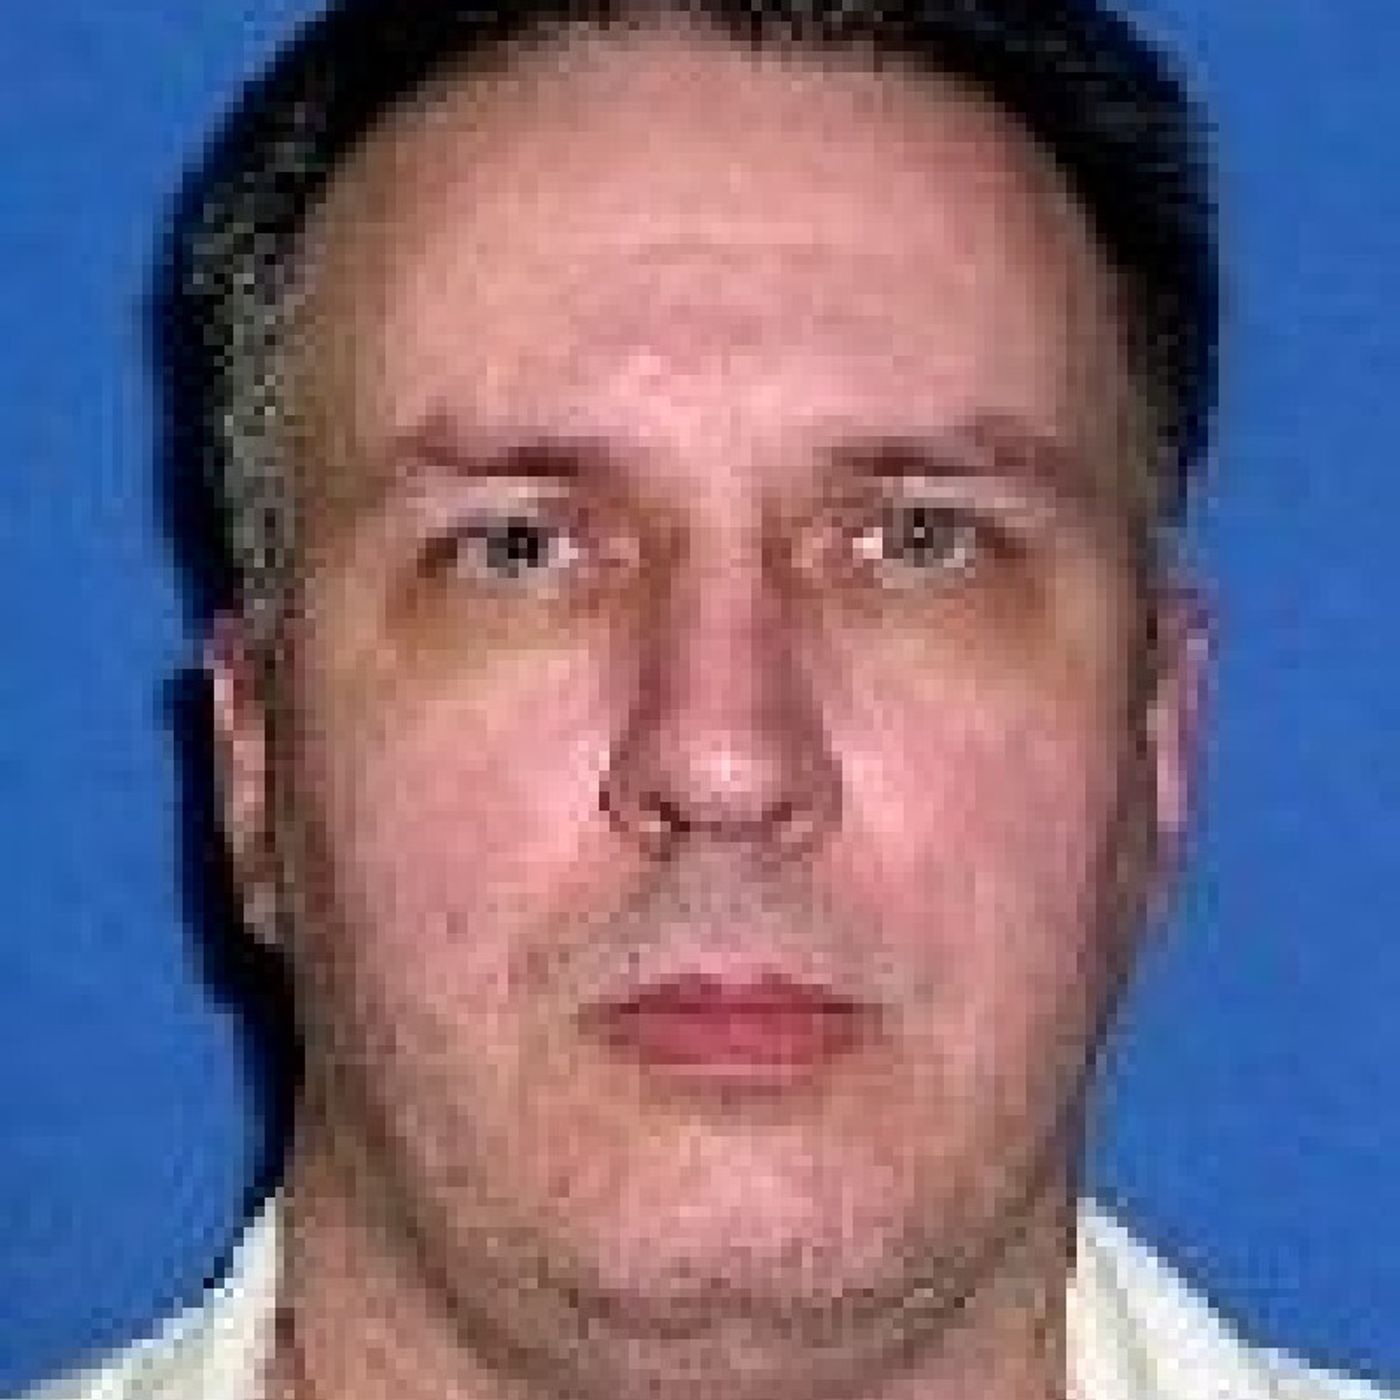 Patrick Murphy FACING EXECUTION IN TEXAS MARCH 28TH